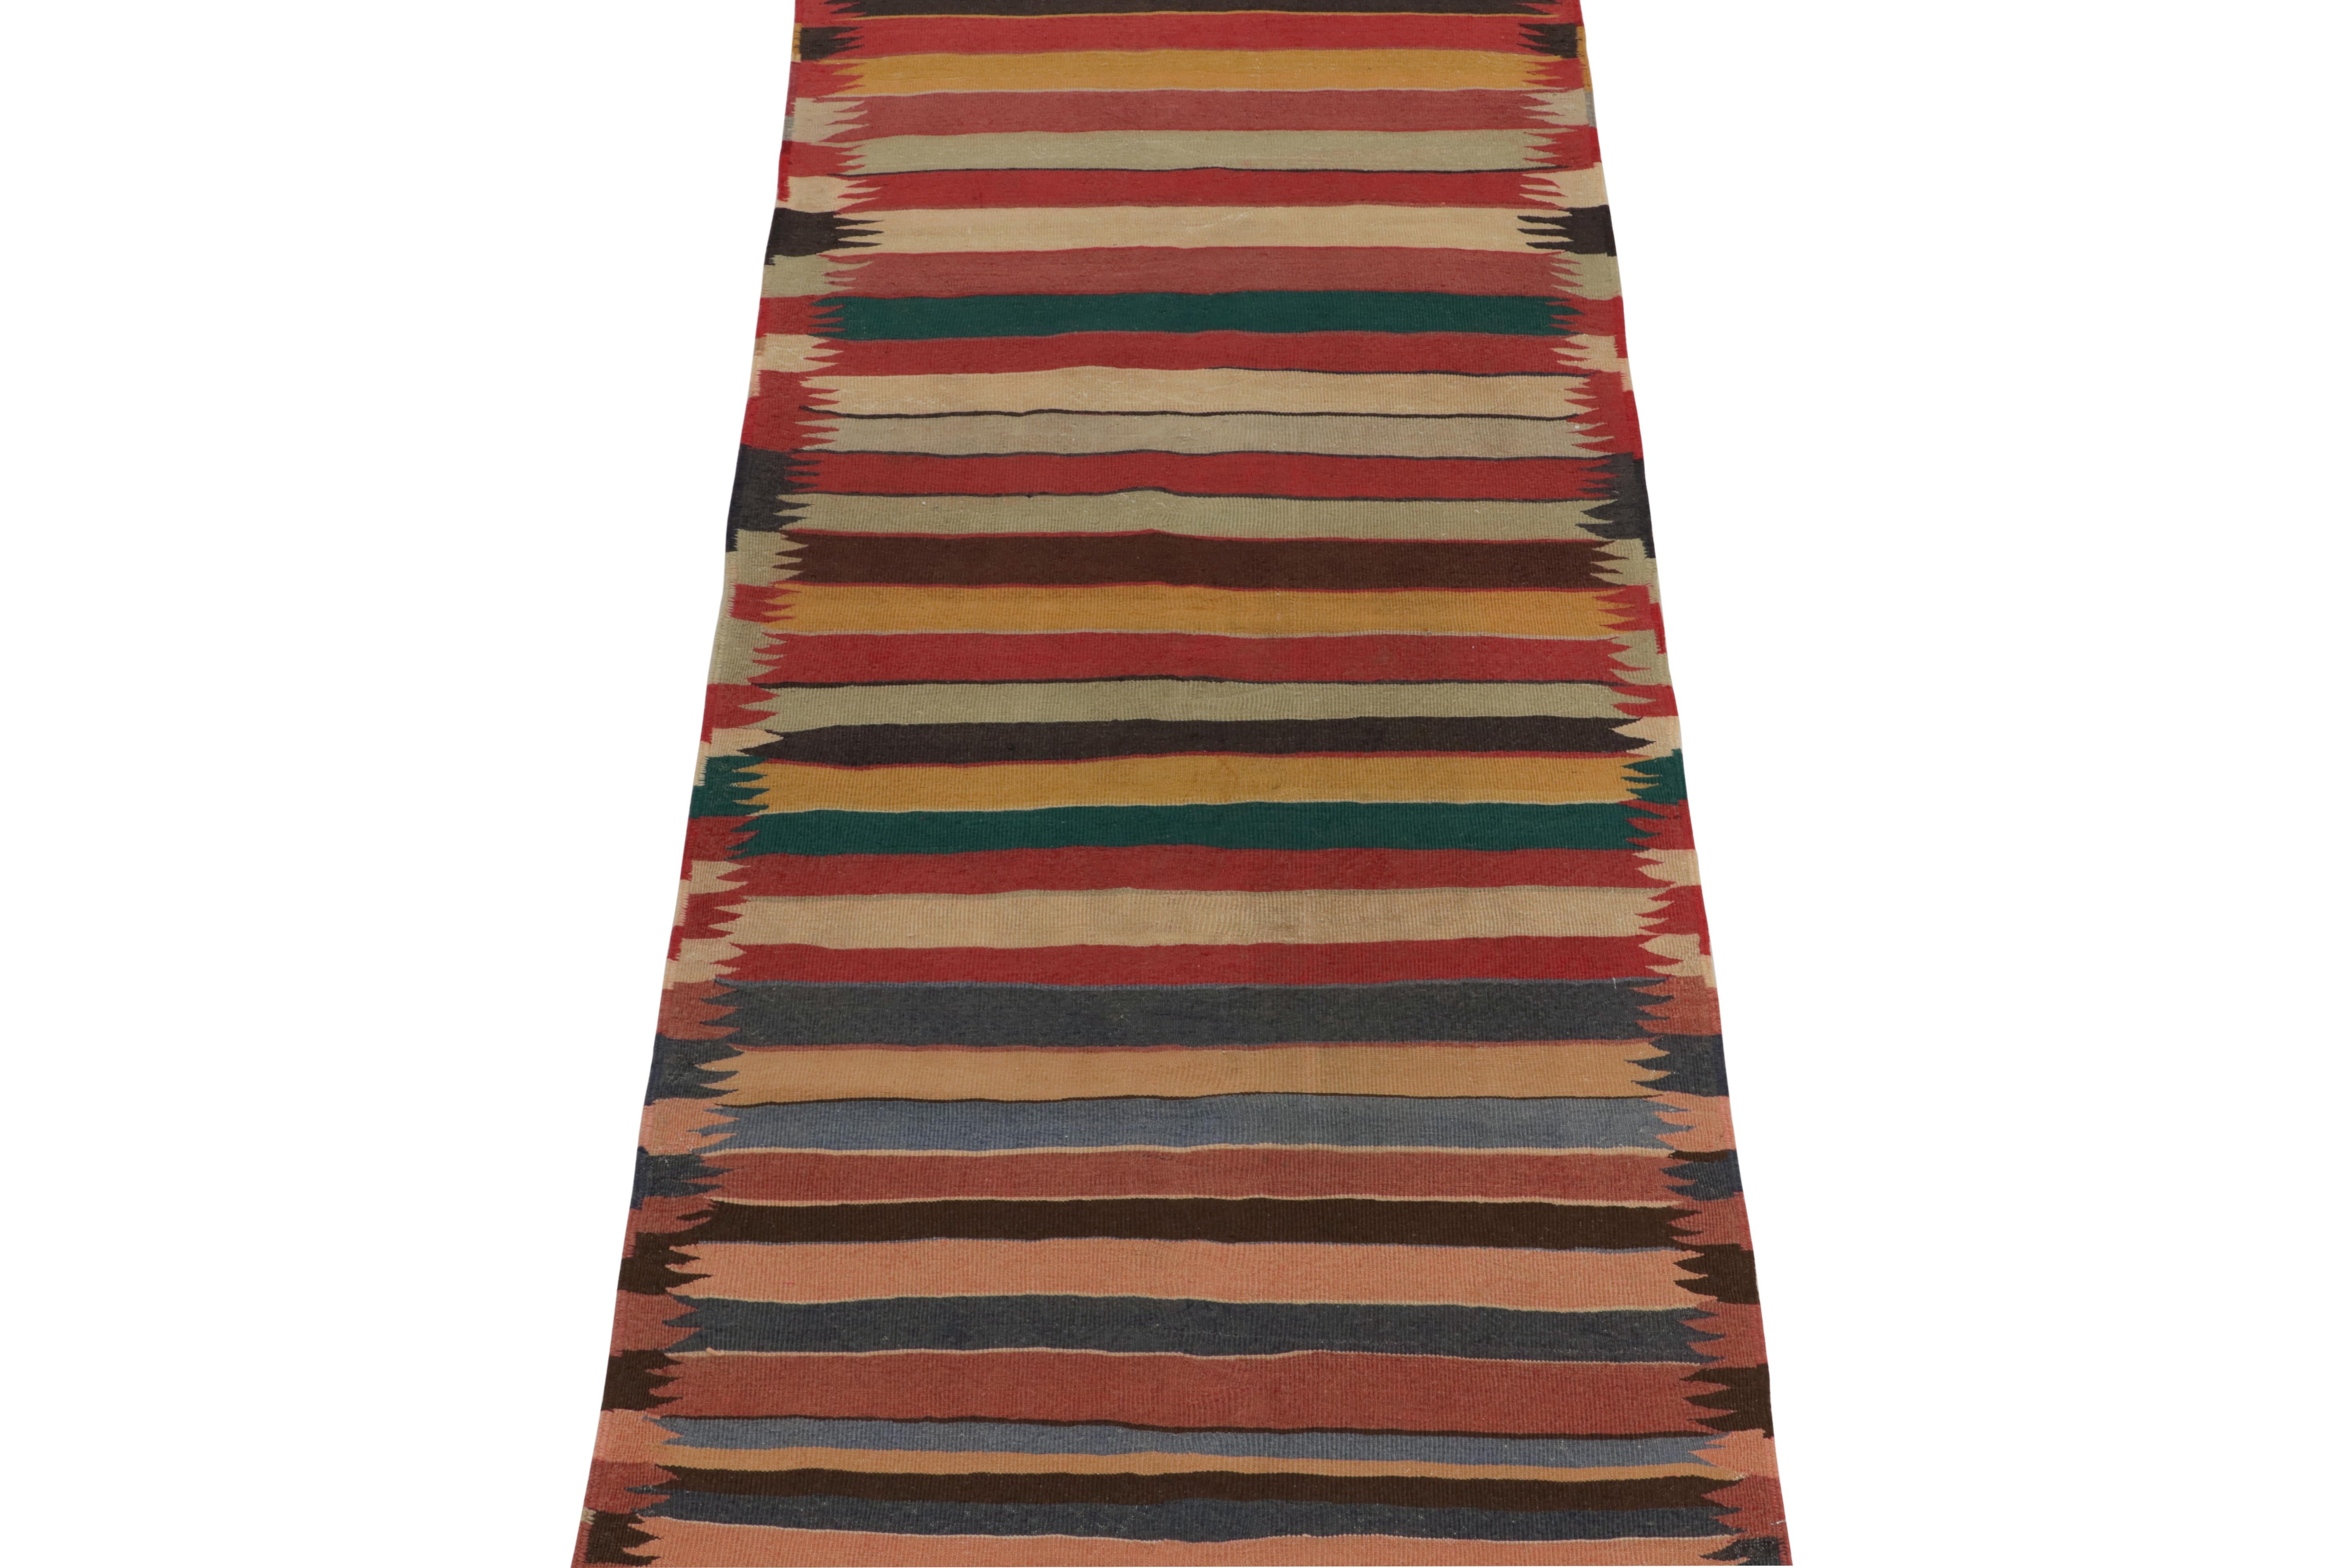 This vintage 4x11 Shahsavan kilim is a unique tribal rug for its period and provenance. Handwoven in wool, it originates from Turkey circa 1950-1960. 

Further on the Design:

The field hosts horizontal stripes alternating in red, beige-brown, blue,